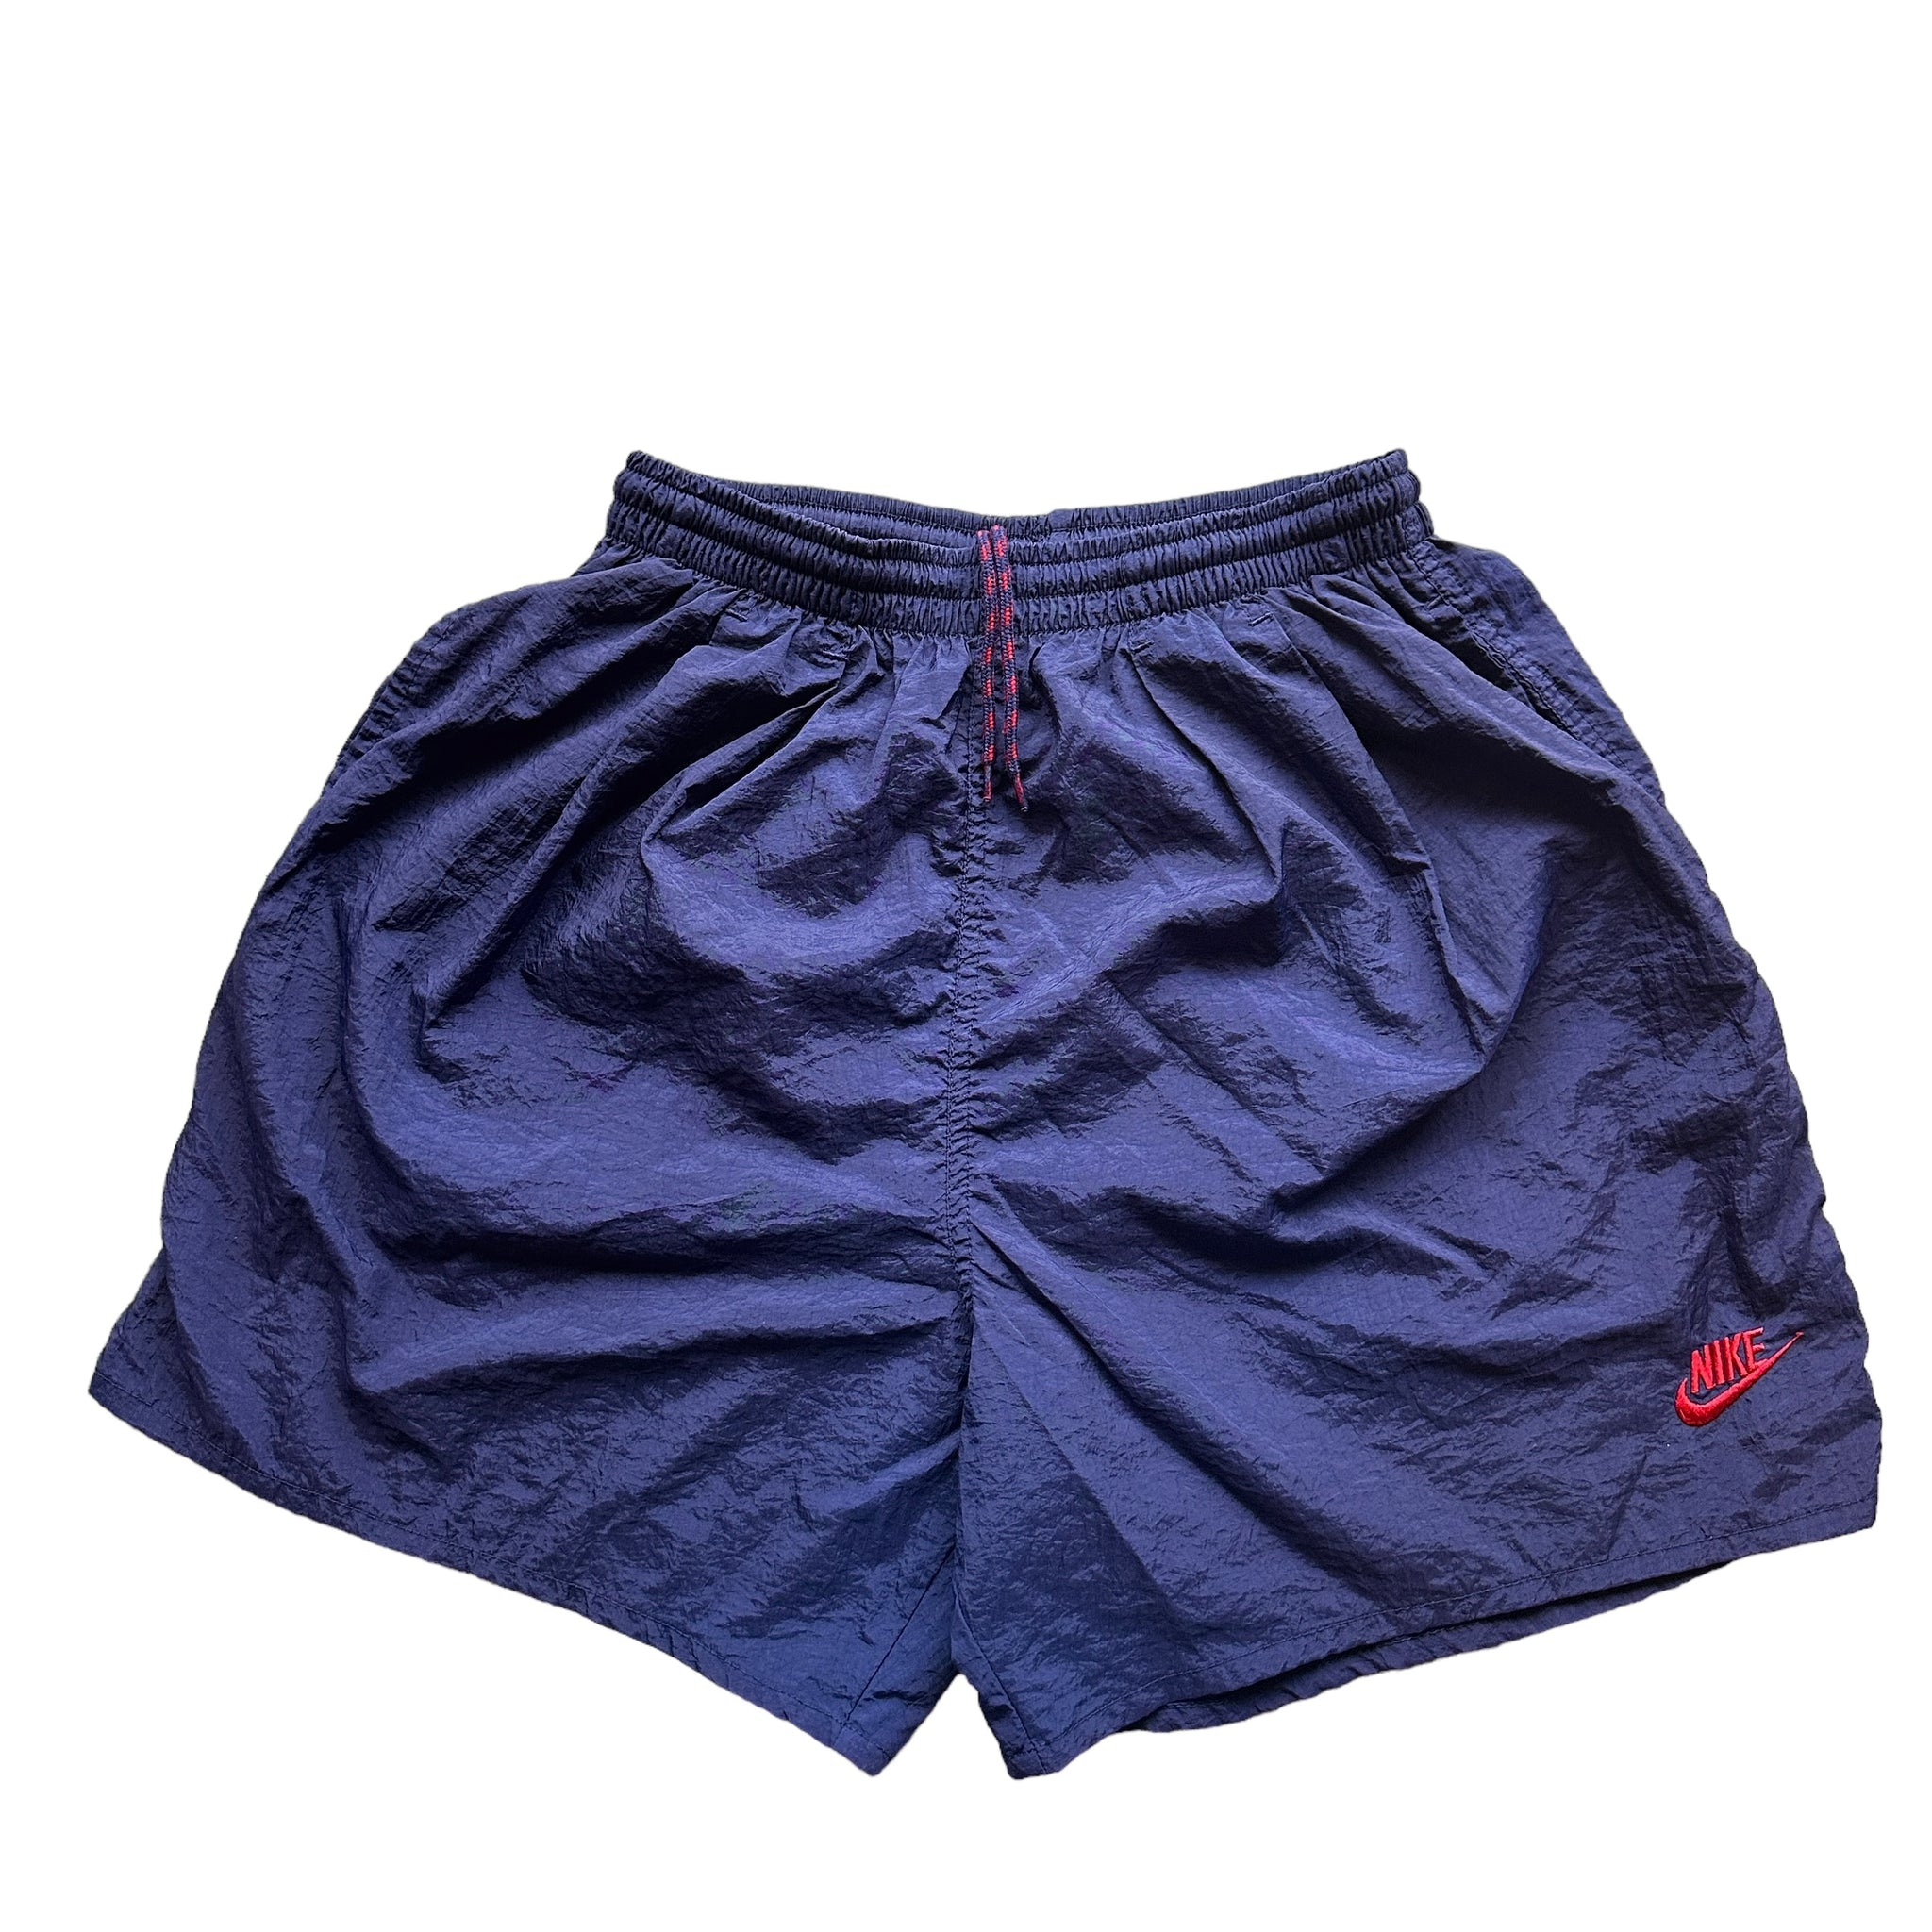 90s Nike shorts navy red small